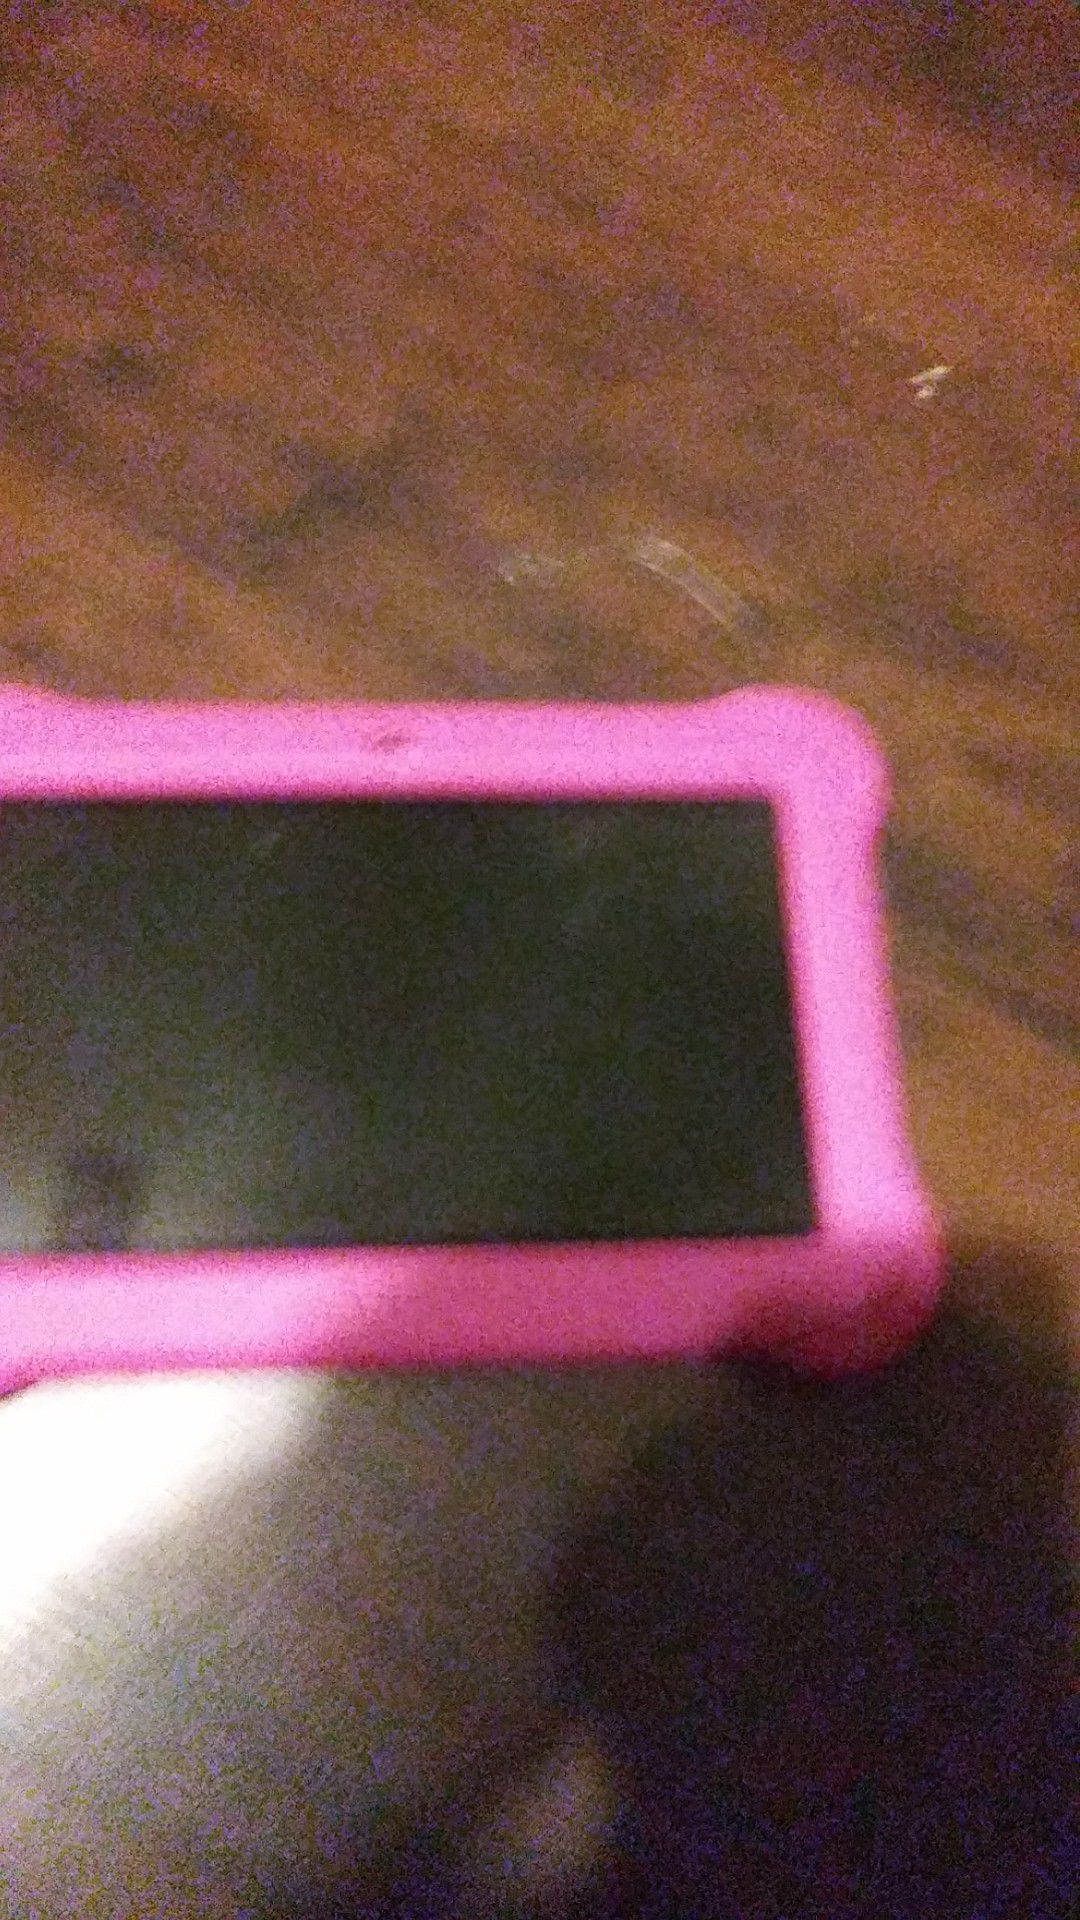 Girl Tablet --- orbo brand paid $65 asking $25